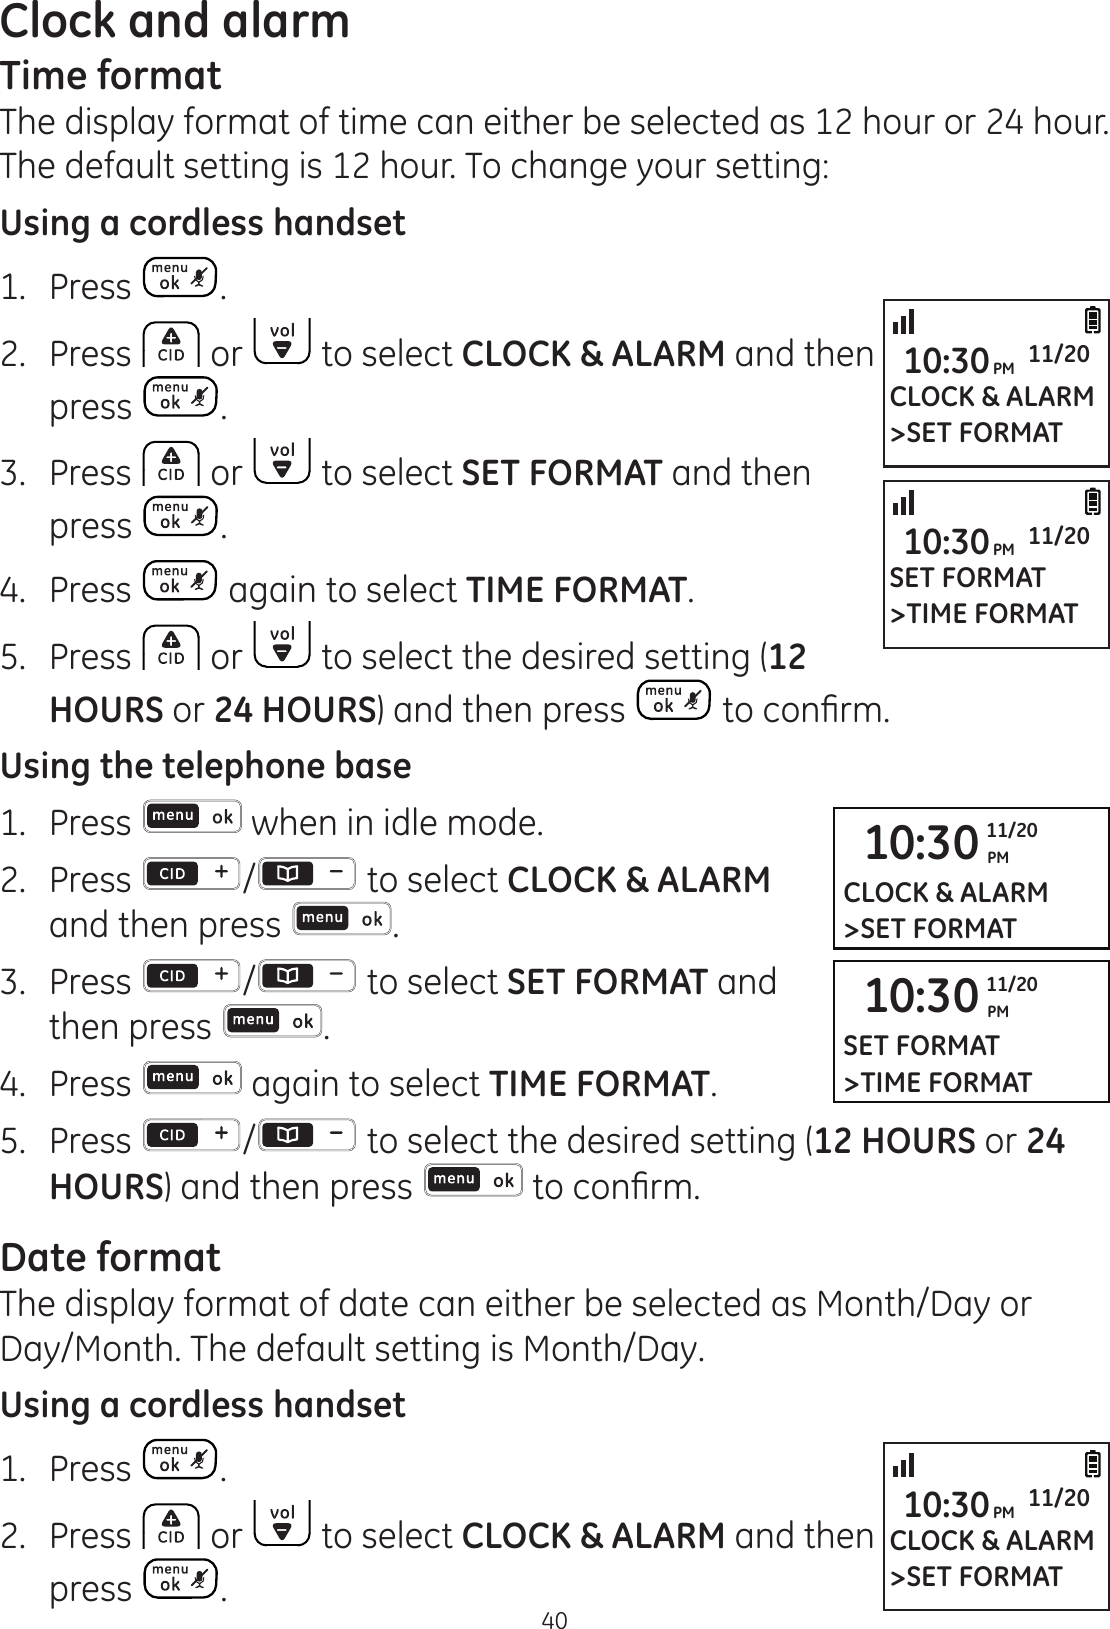 Clock and alarm40Time formatThe display format of time can either be selected as 12 hour or 24 hour. The default setting is 12 hour. To change your setting:Using a cordless handset1.  Press .2.  Press   or   to select CLOCK &amp; ALARM and then press  .3.  Press   or   to select SET FORMAT and then press  .4.  Press   again to select TIME FORMAT.5.  Press   or   to select the desired setting (12 HOURS or 24 HOURS) and then press  WRFRQ¿UPUsing the telephone base1.  Press   when in idle mode. 2.   Press  /  to select CLOCK &amp; ALARM and then press  .3.  Press  /  to select SET FORMAT and then press  .4.  Press   again to select TIME FORMAT.5.  Press  / to select the desired setting (12 HOURS or 24 HOURS) and then press   WRFRQ¿UPDate formatThe display format of date can either be selected as Month/Day or Day/Month. The default setting is Month/Day. Using a cordless handset1.  Press  .2.  Press   or   to select CLOCK &amp; ALARM and then press  .CLOCK &amp; ALARM&gt;SET FORMAT10:30PM 11/2010:30 PM11/20CLOCK &amp; ALARM&gt;SET FORMATCLOCK &amp; ALARM&gt;SET FORMAT10:30PM 11/20SET FORMAT&gt;TIME FORMAT10:30PM 11/2010:30 PM11/20SET FORMAT&gt;TIME FORMAT